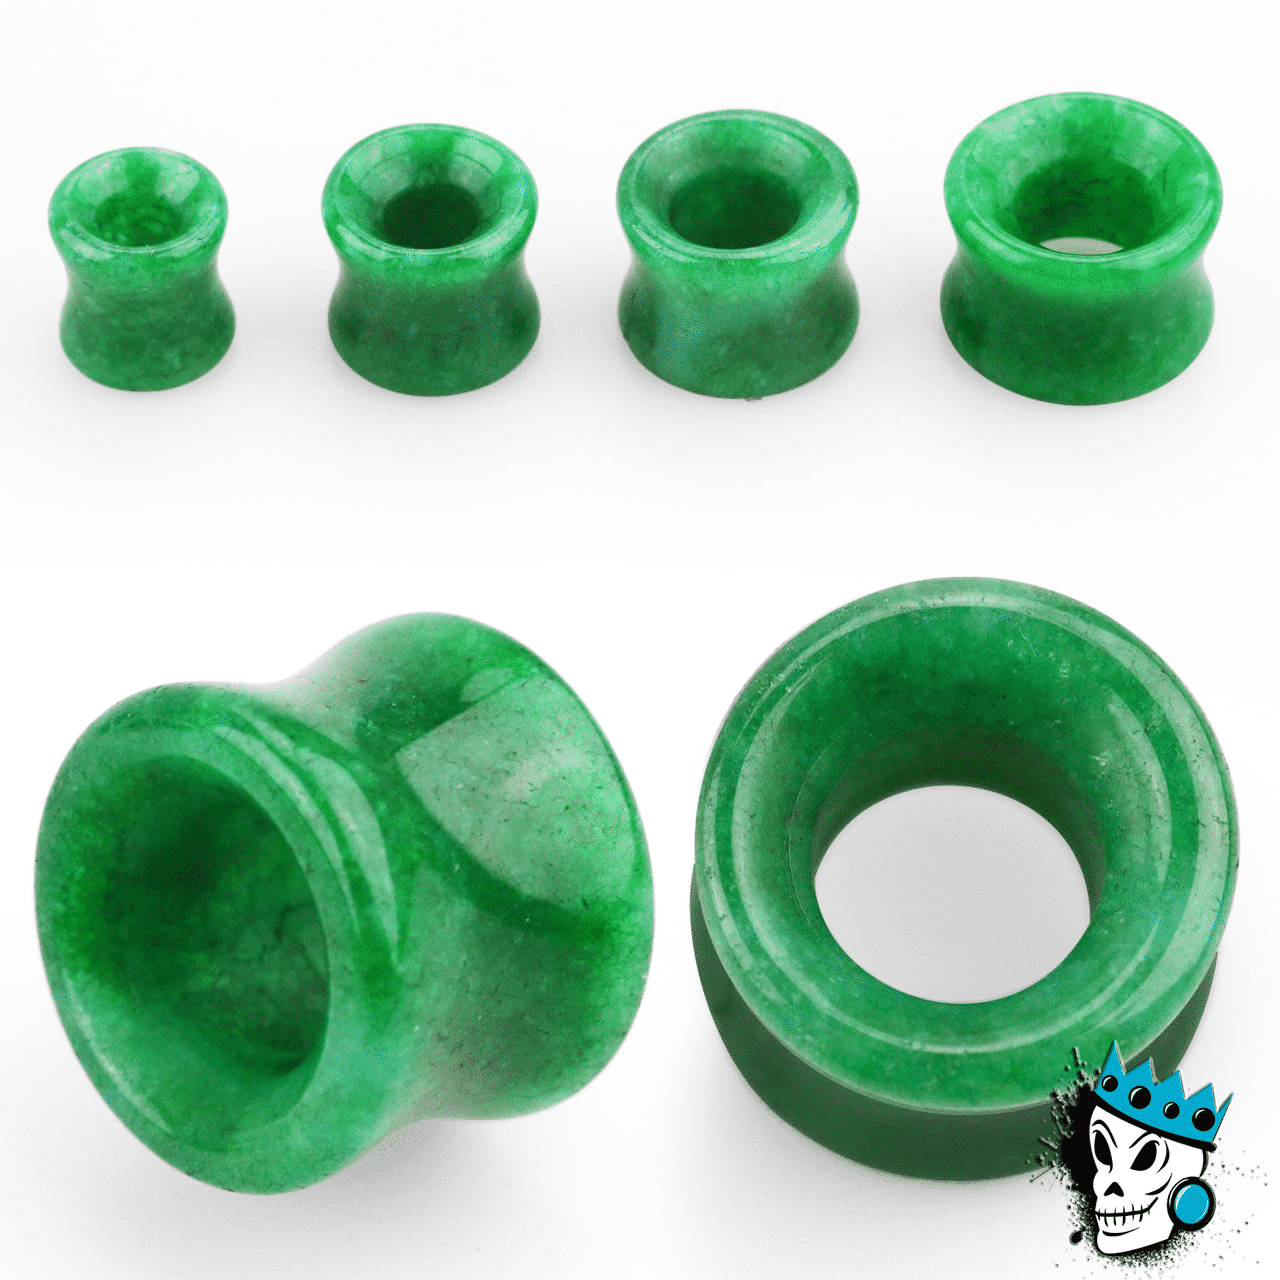 Green Jade Stone Concave Tunnels (2 gauge - 13/16 inch)